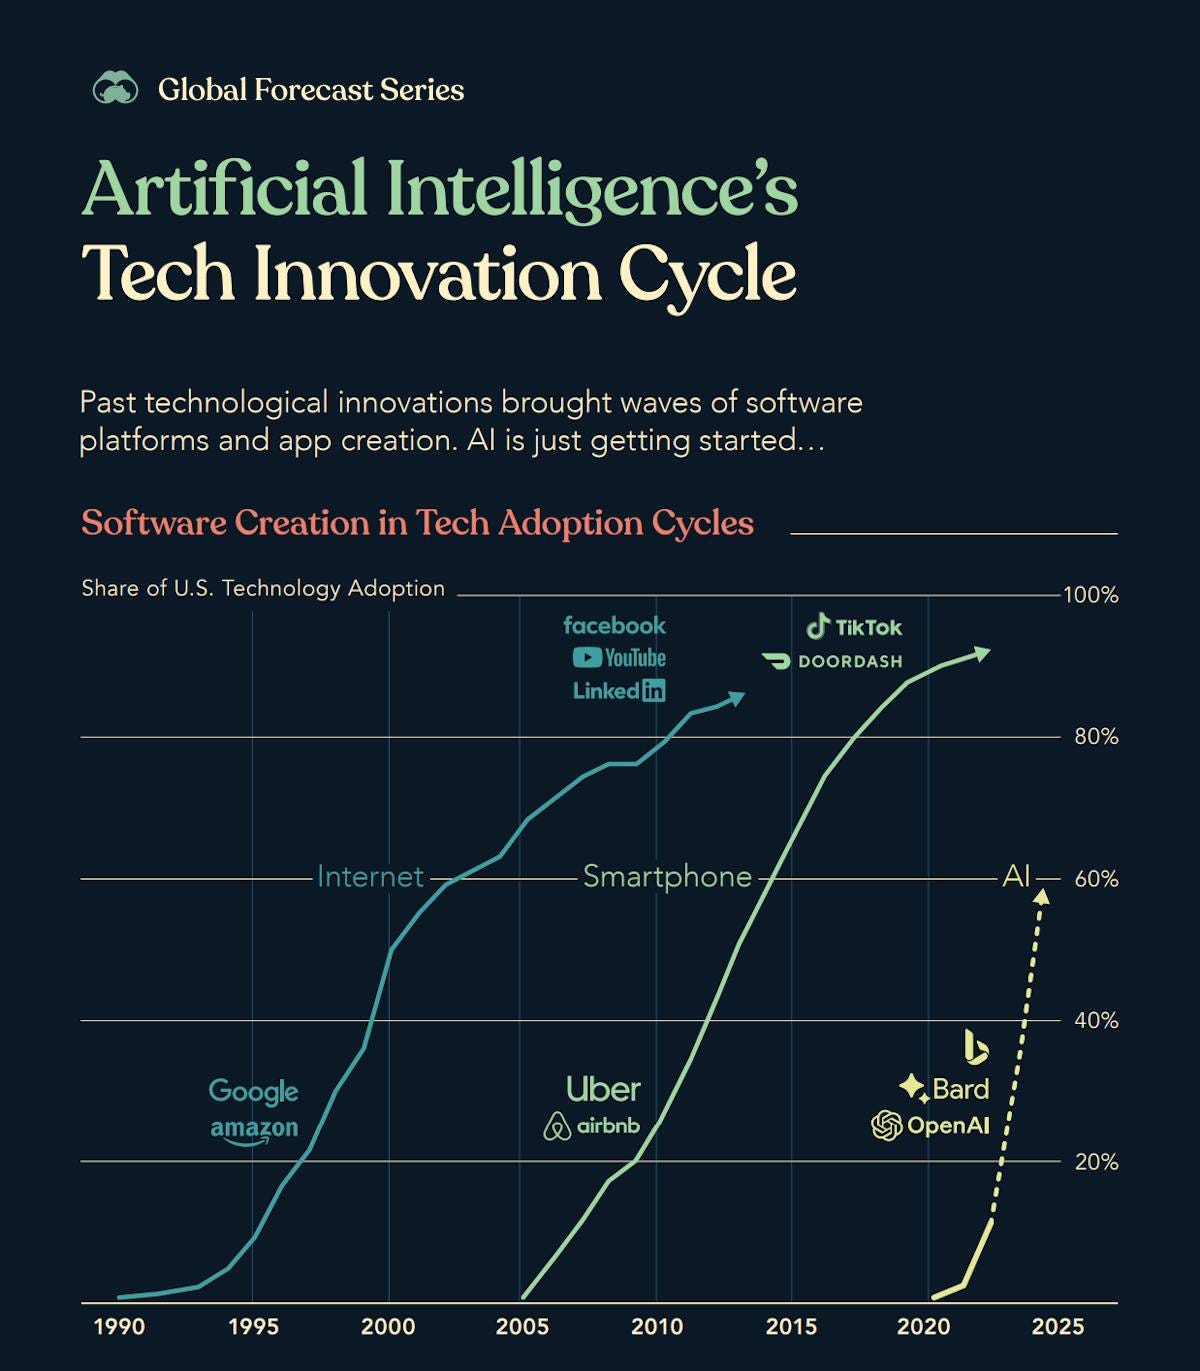 May be a graphic of text that says 'Global Forecast Series Artificial Intelligence's Tech Innovation Cycle Past technological innovations brought waves of software platforms and app creation. Al sjust getting started... Software Creation in Tech Adoption Cycles ShafU.S Share Technology Adoption facebook YouTube Linked in 100% To DOORDASH 80% Internet Smartphone 60% Google amazon Uber airbnb 40% Bard OpenAl 1990 1995 20% 2000 2005 2010 2015 2020 2025'